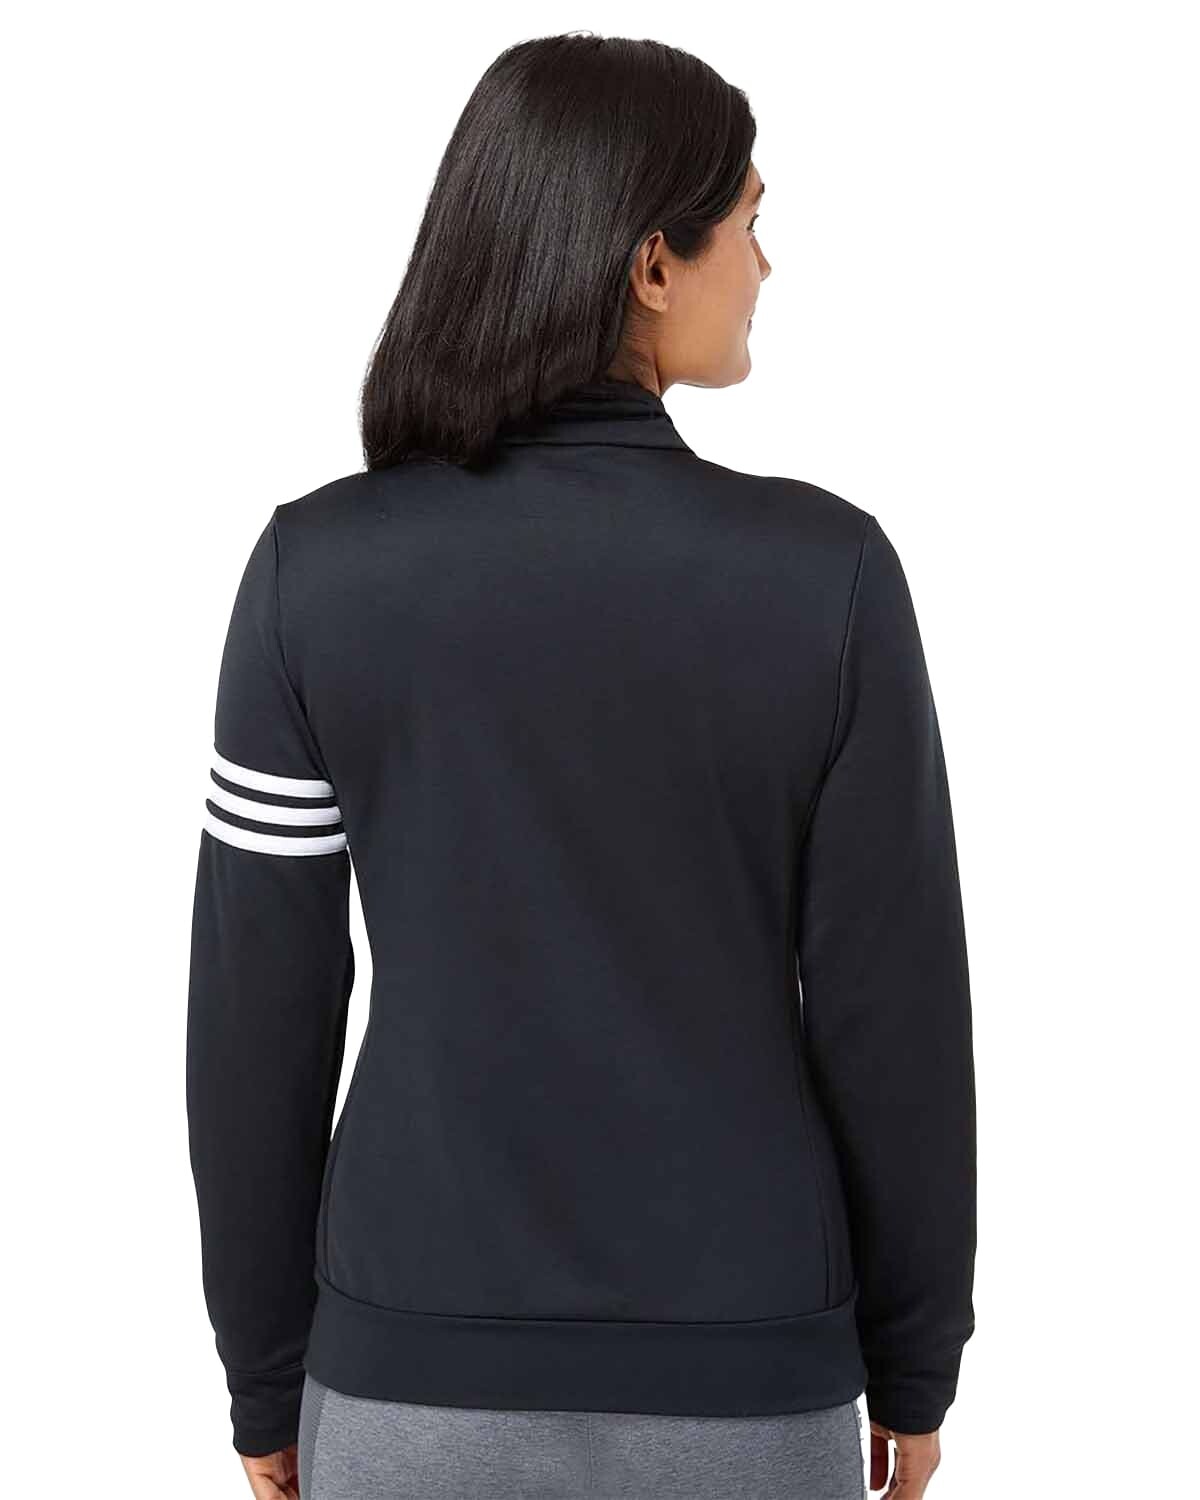 Jacket for Adidas 3-Stripes Golf A191 Women Terry French business Full-Zip Custom